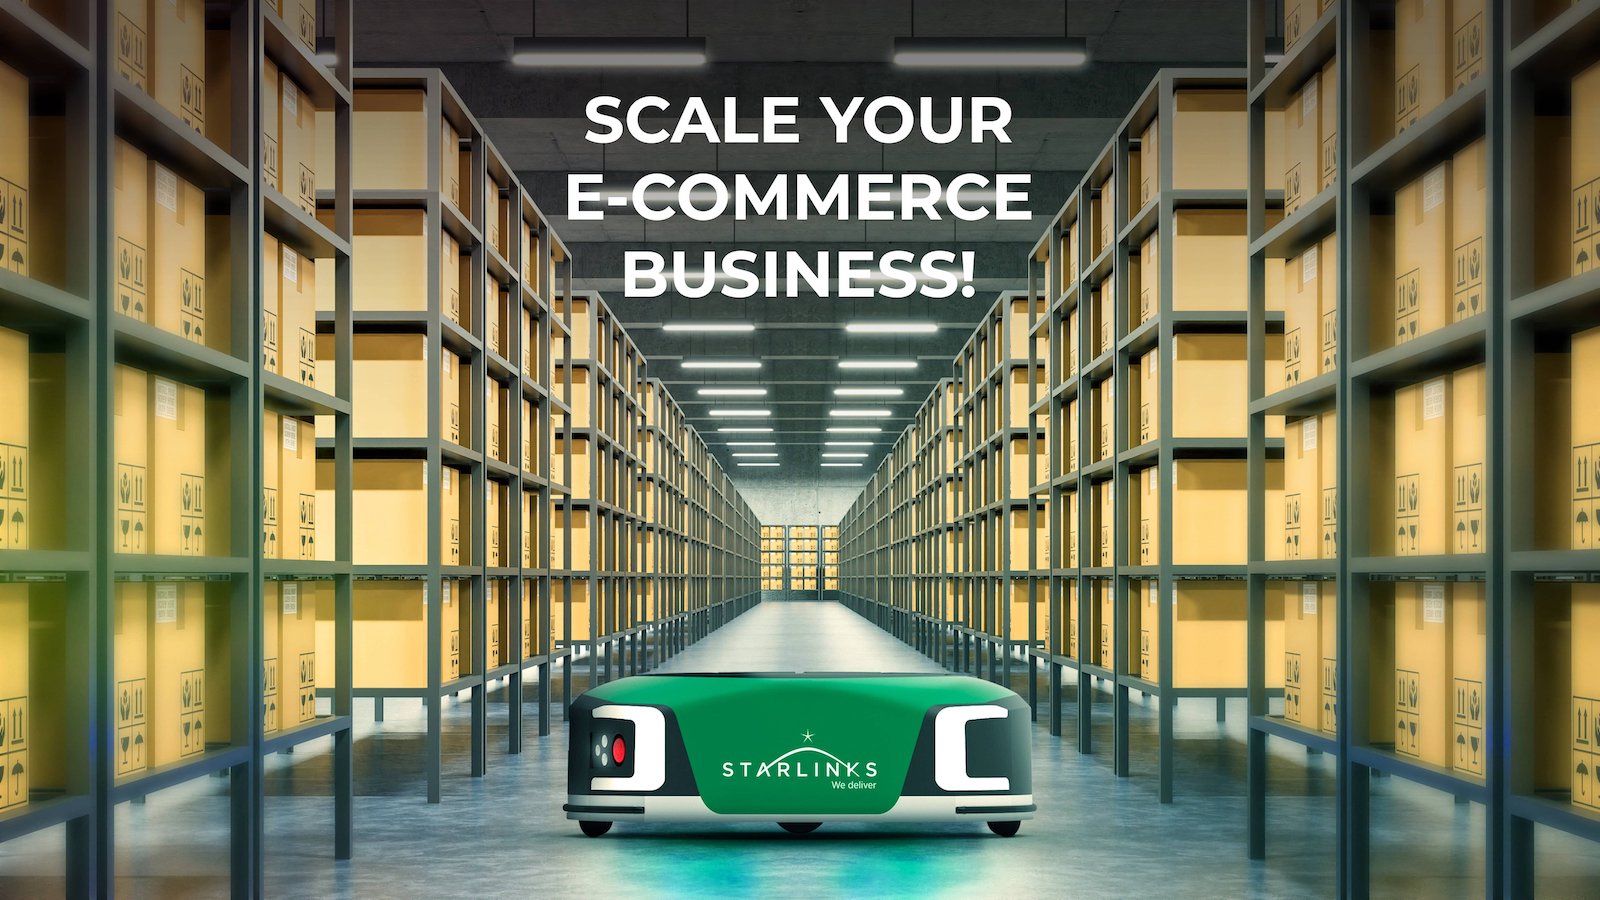 Scale your e-commerce business